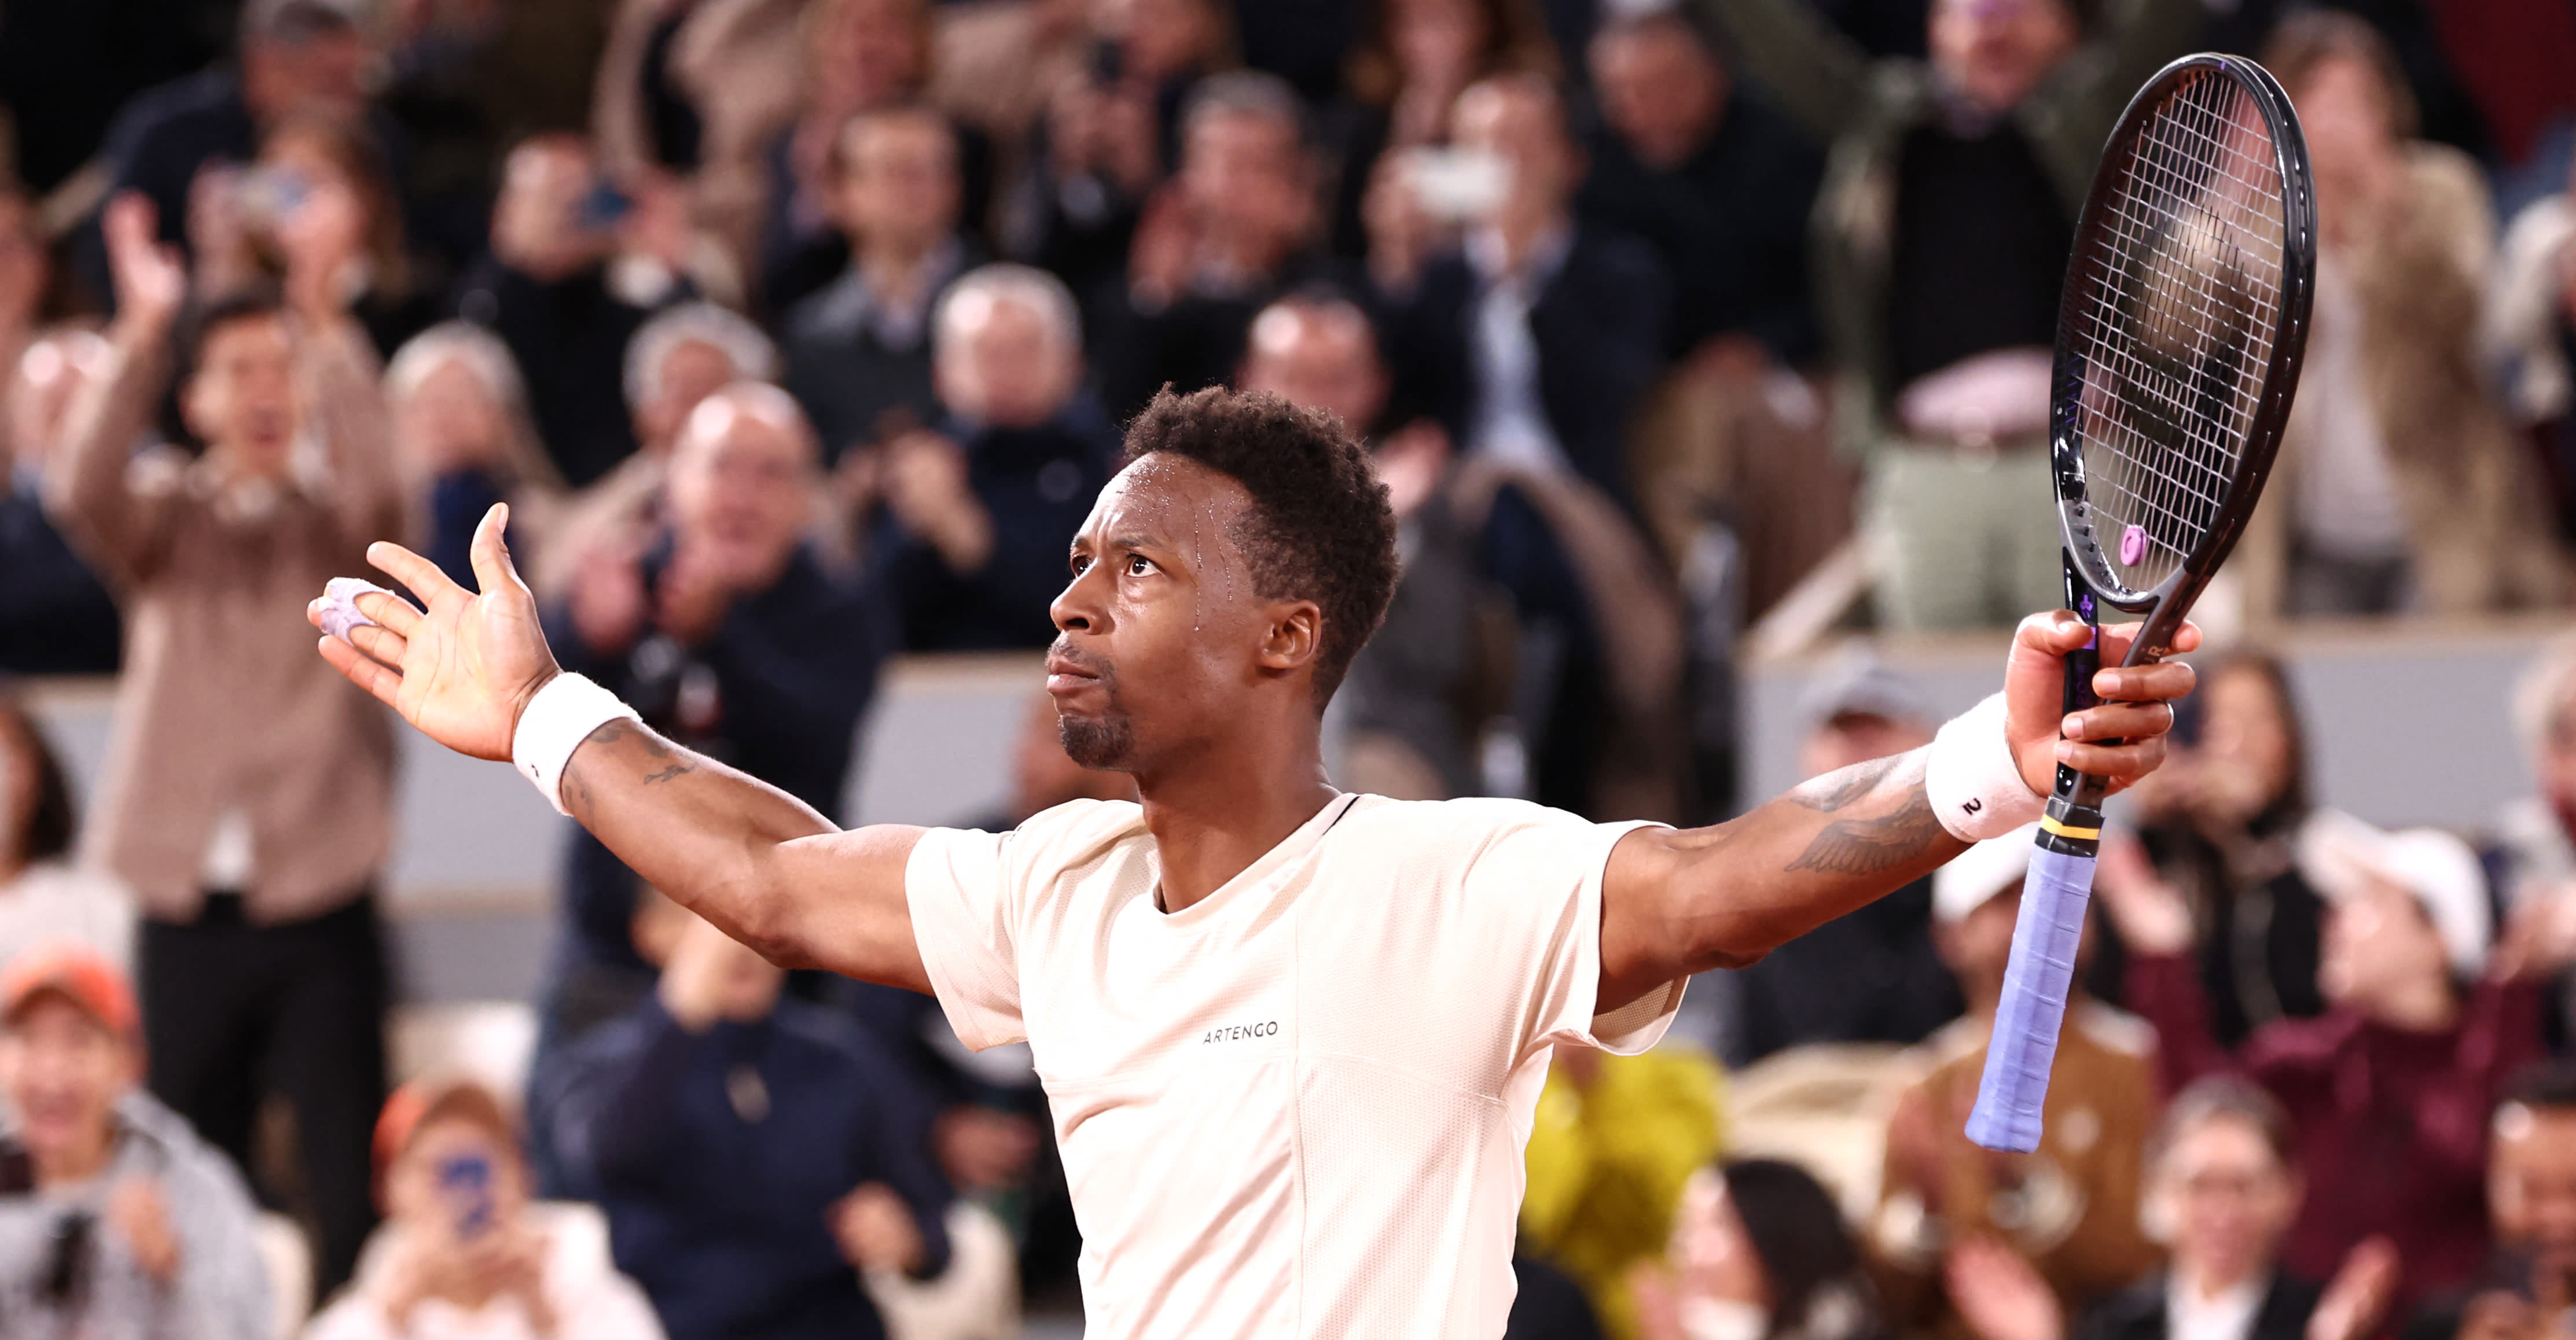 Gael Monfils breaks all-time French Grand Slam record by winning Roland Garros opener | Tennis.com